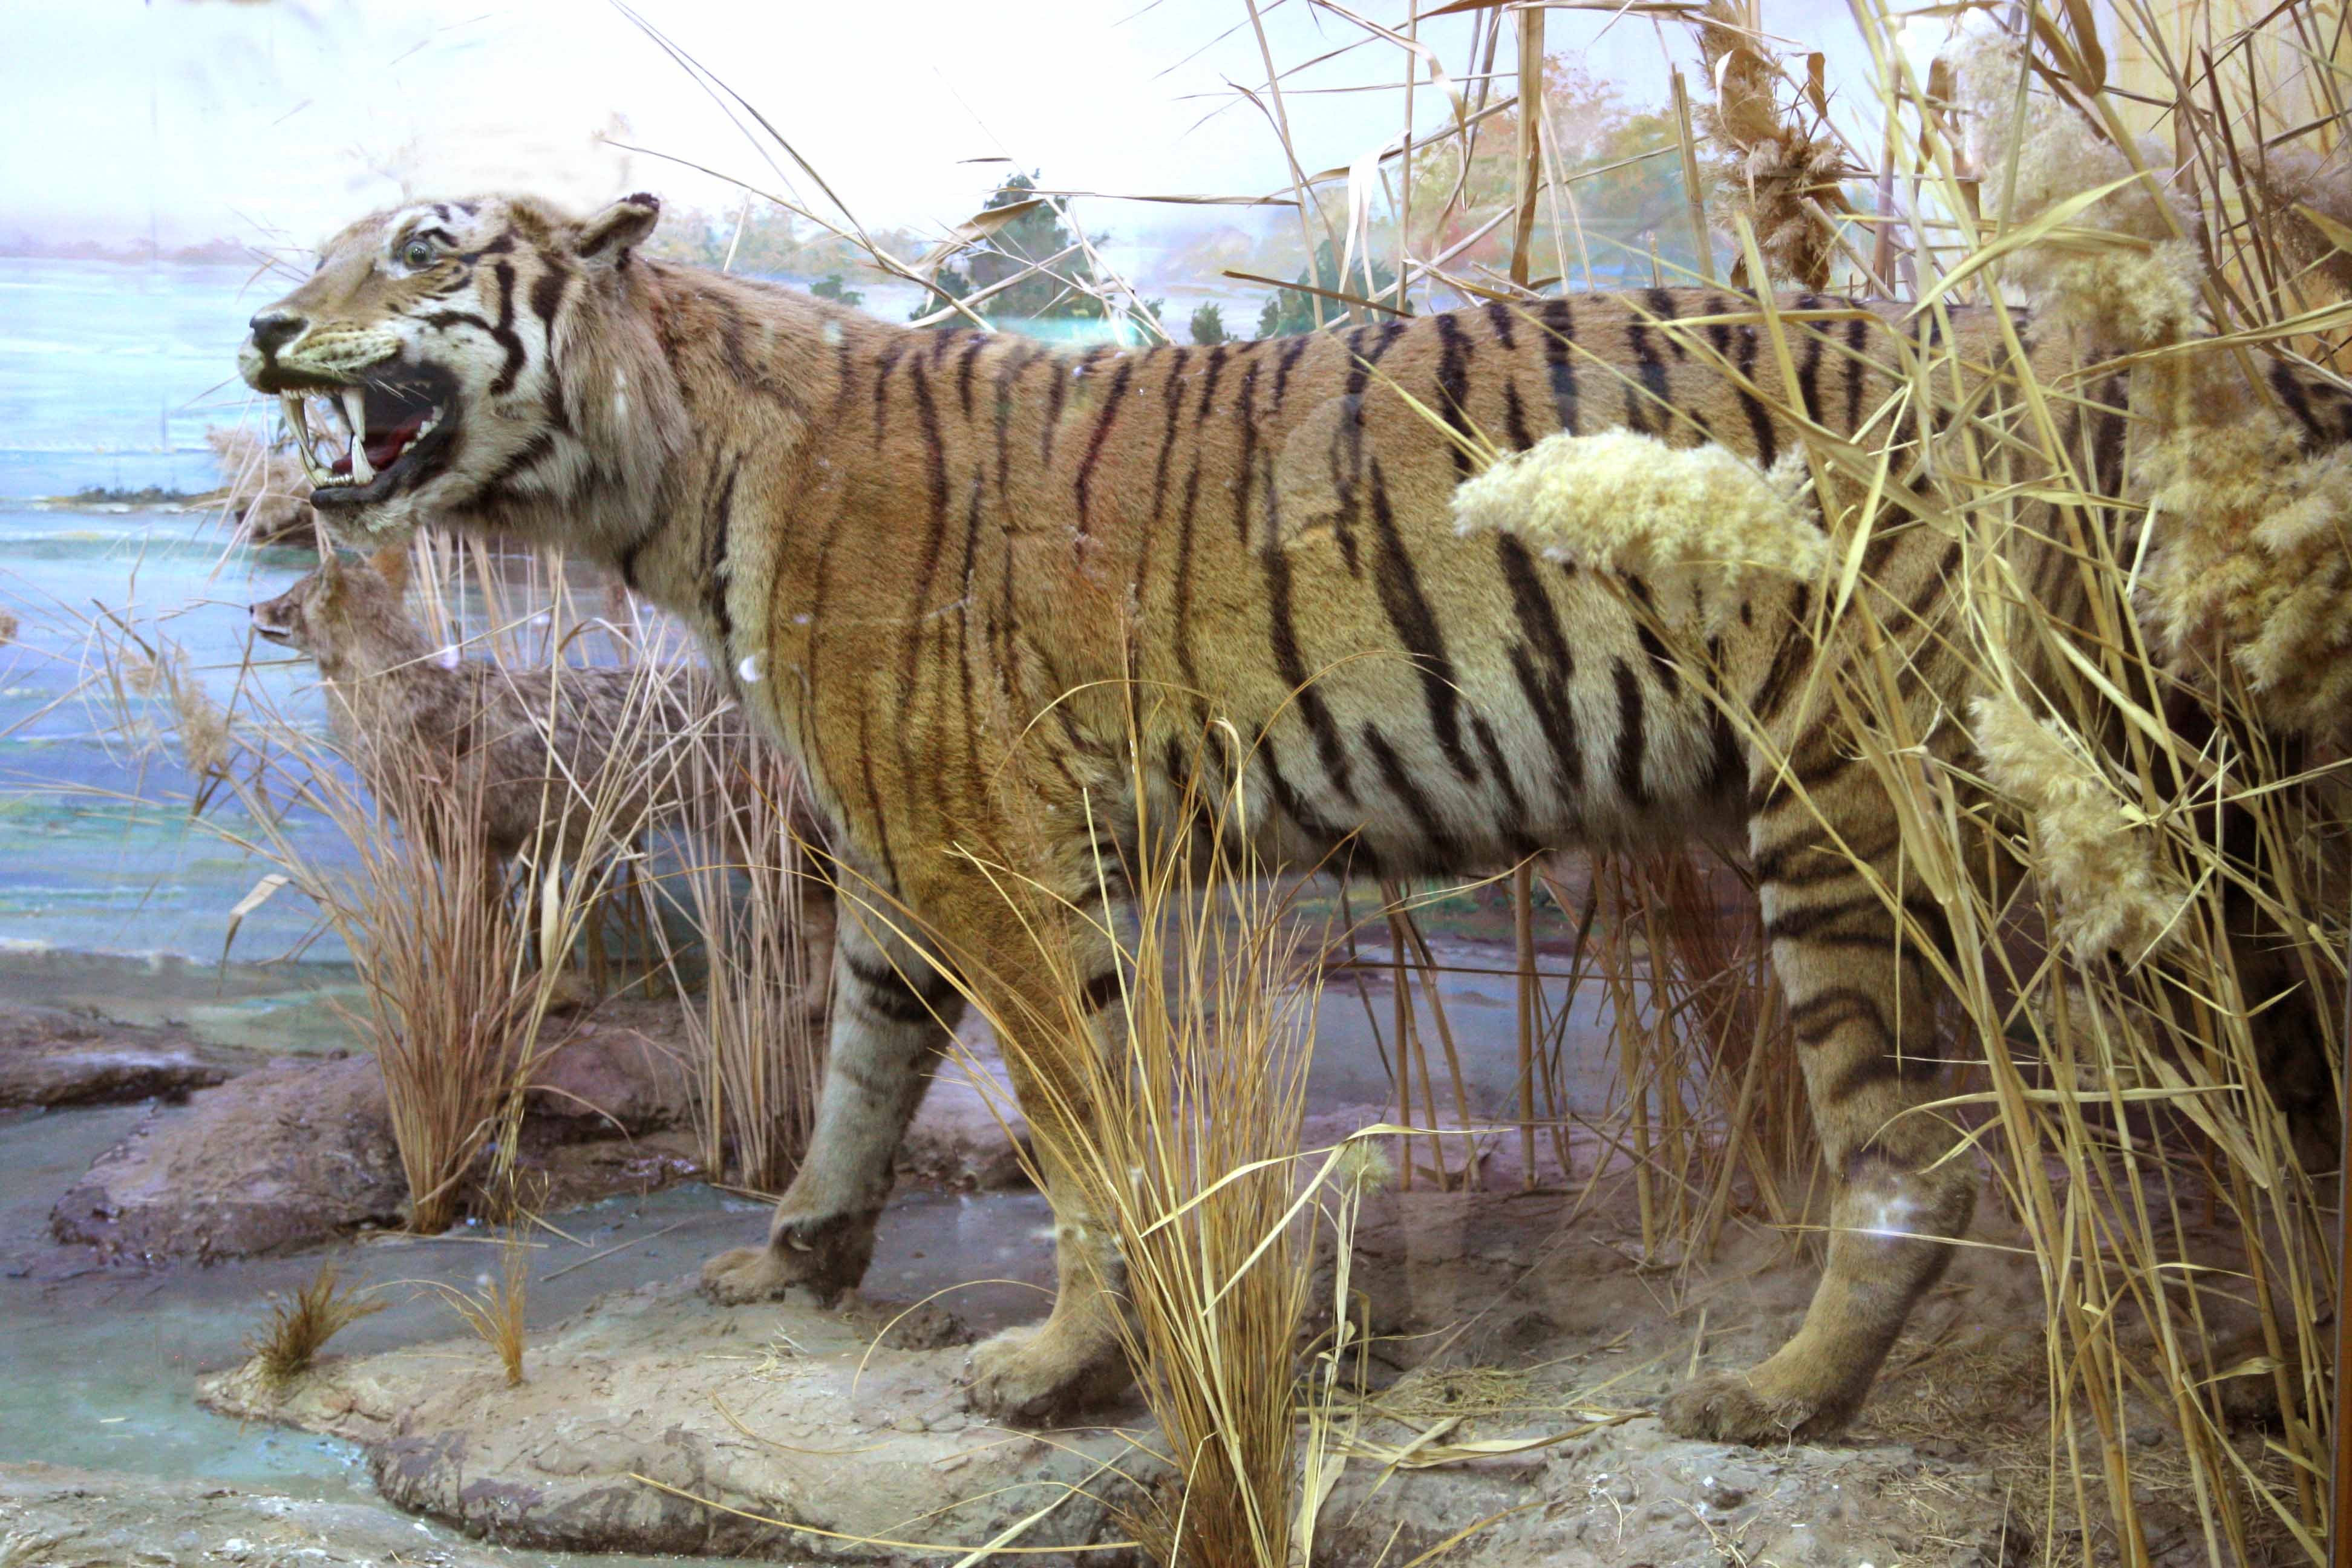 The story of one exhibit: about the Turanian tiger, which no longer exists